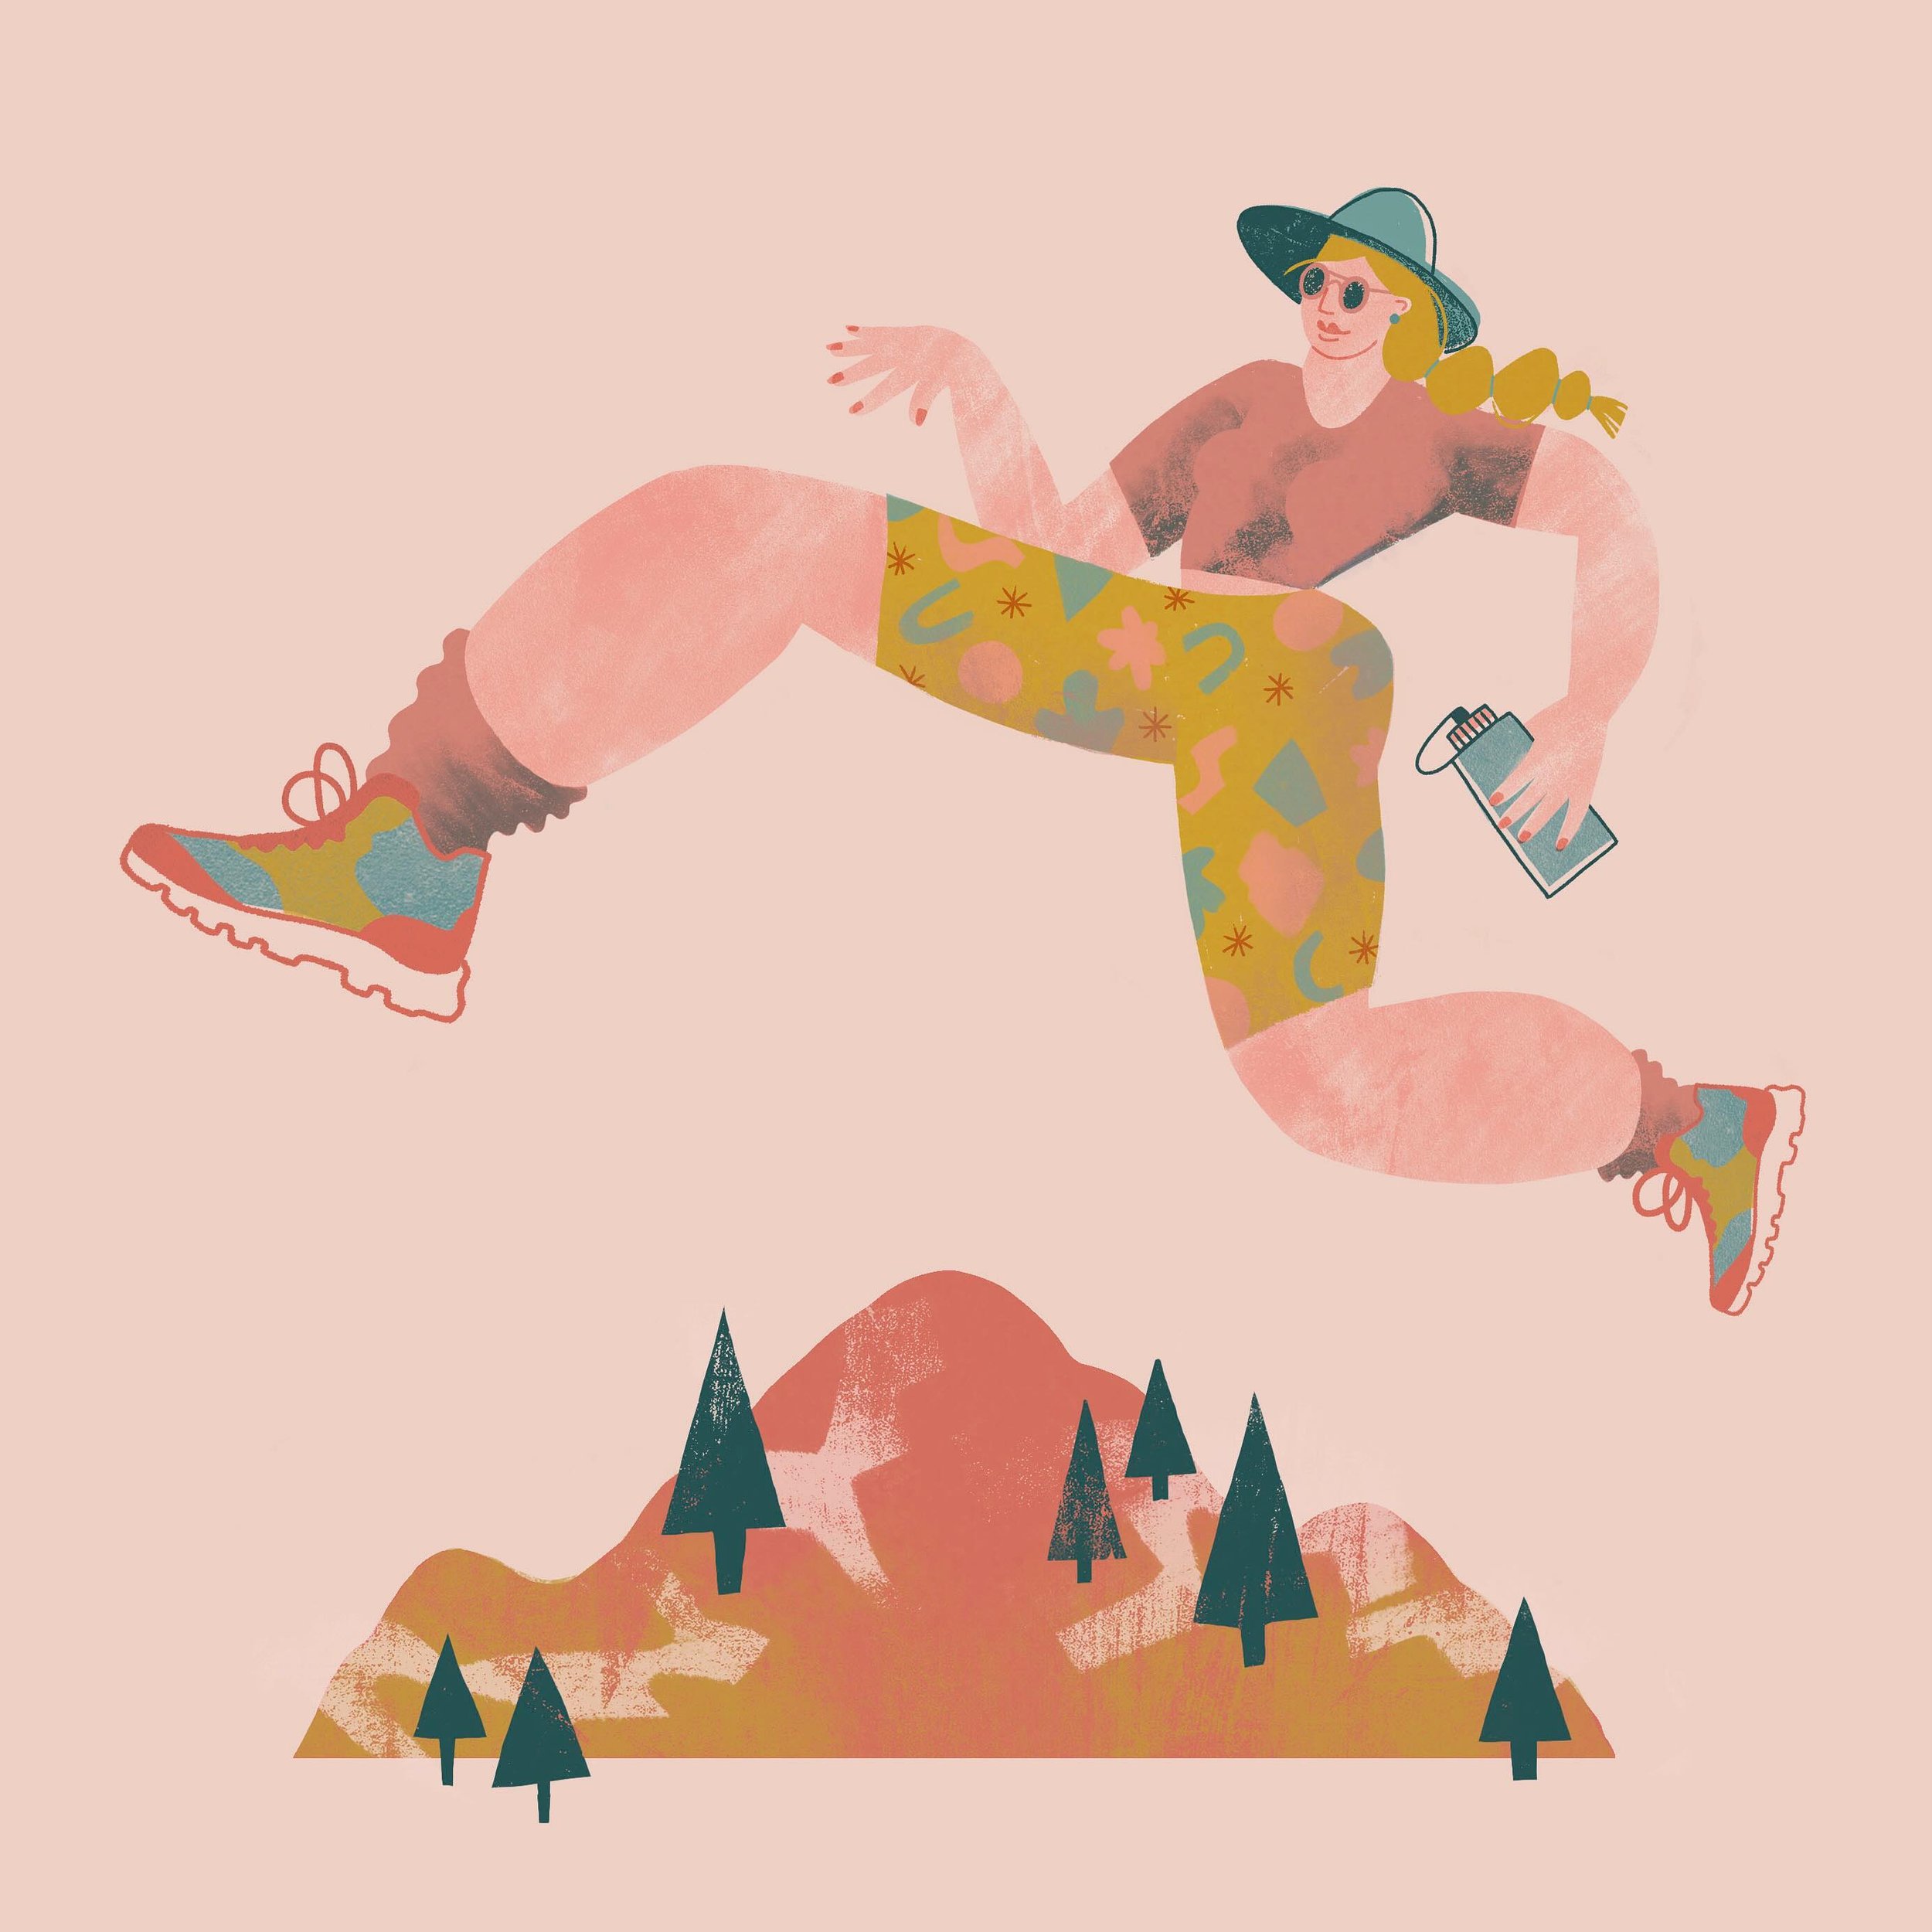 Happily frolicking over the mountains ✨🏔️✨.
.
.
.
#mountainlovers #drawdrawdraw #takeahike